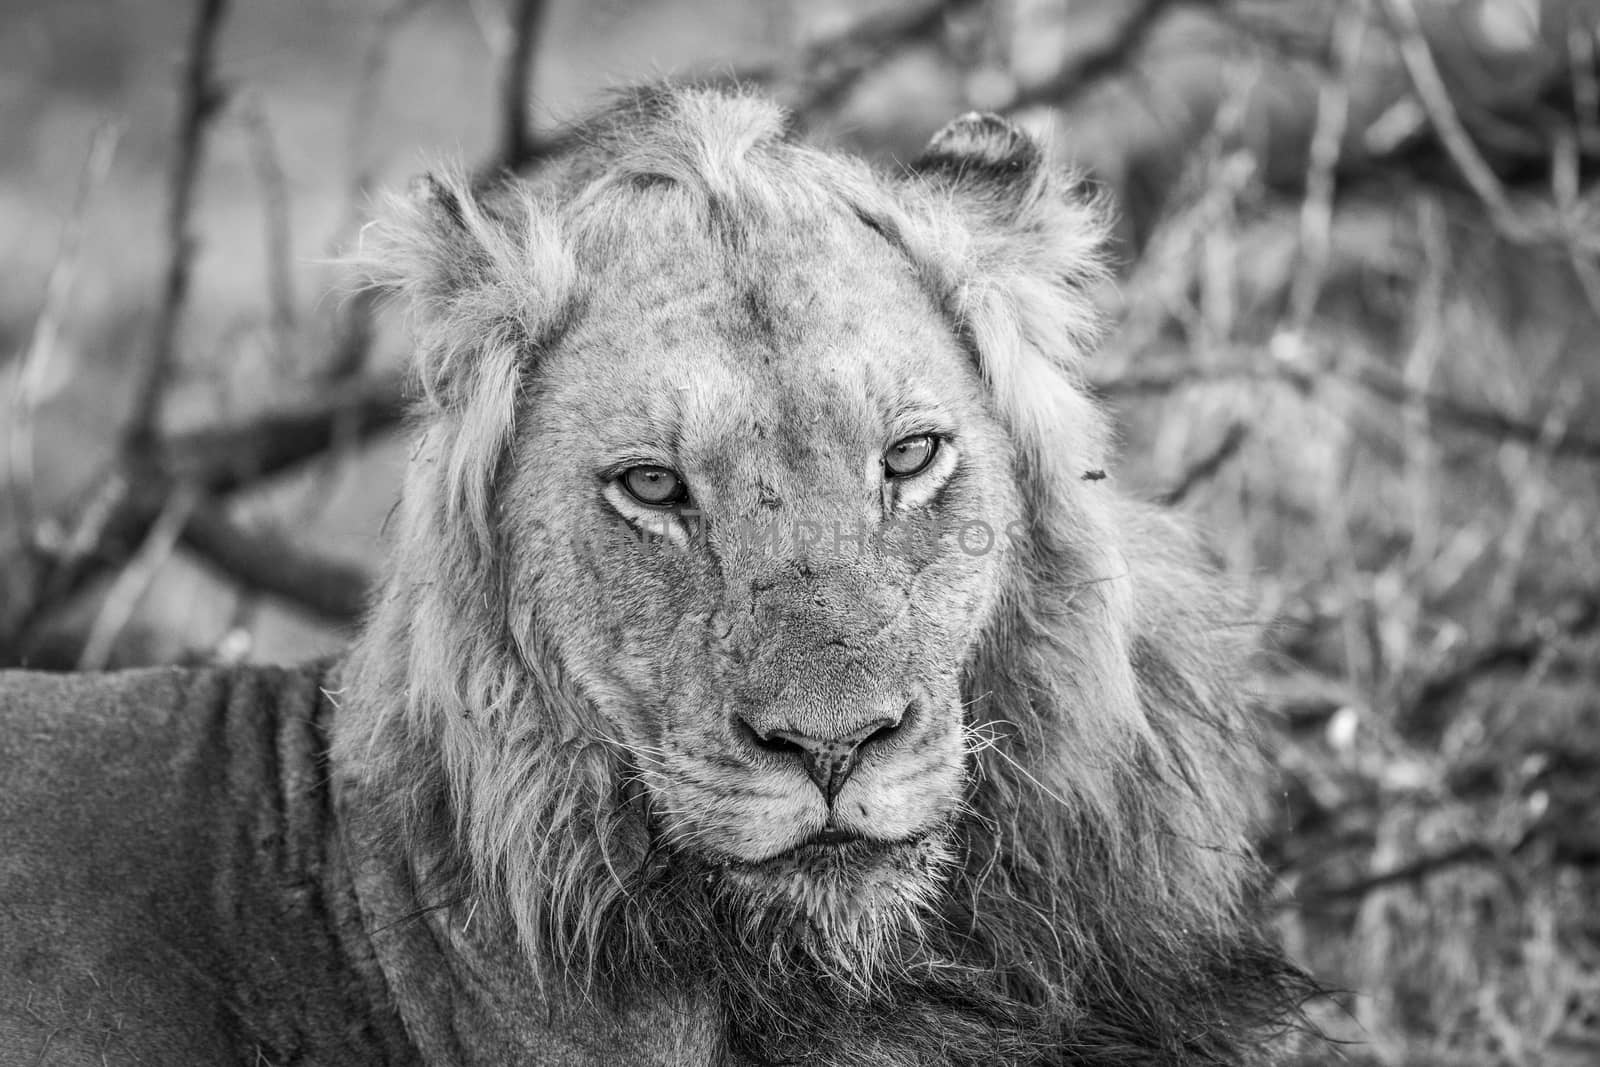 Starring Lion in black and white in the Kruger. by Simoneemanphotography